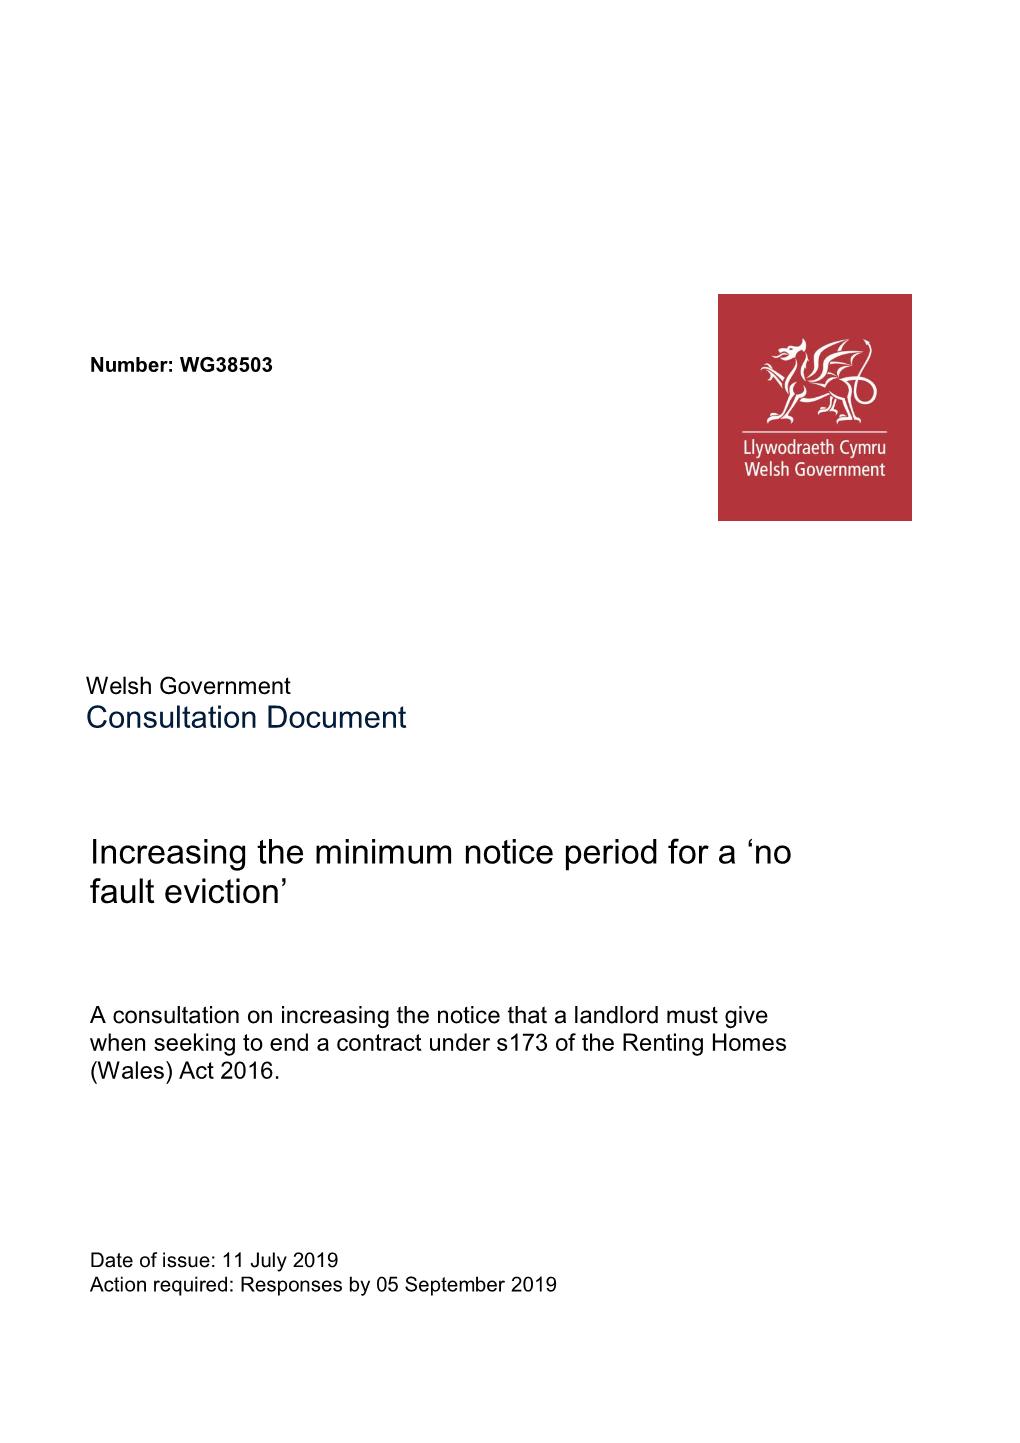 Increasing the Minimum Notice Period for a 'No Fault Eviction'